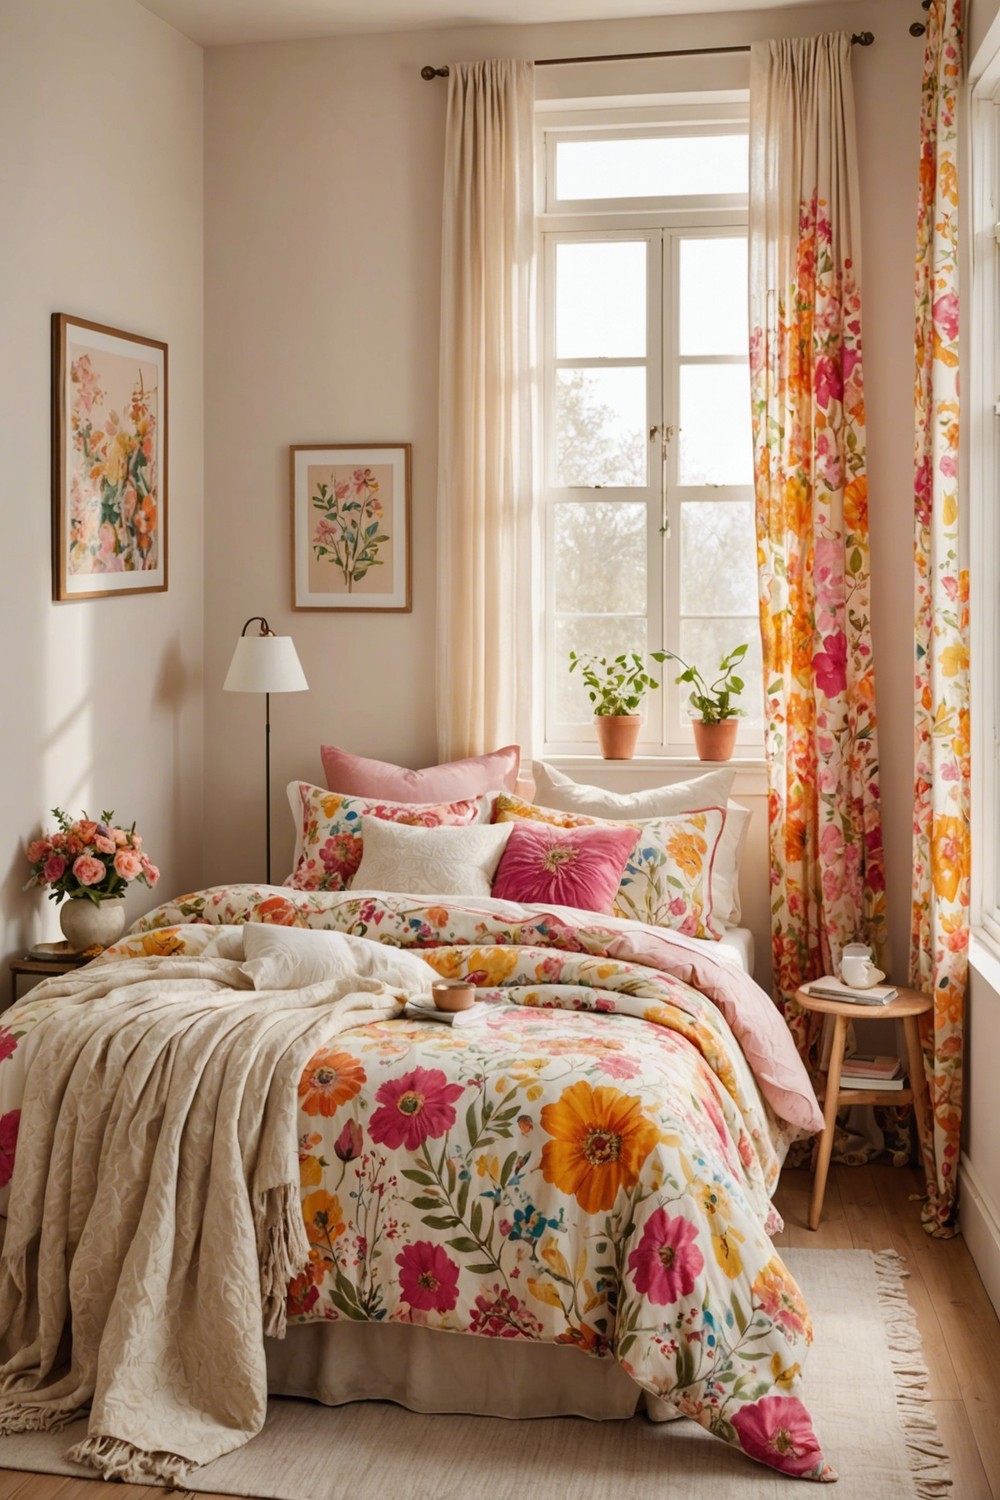 Floral Patterns On Bedding And Curtains